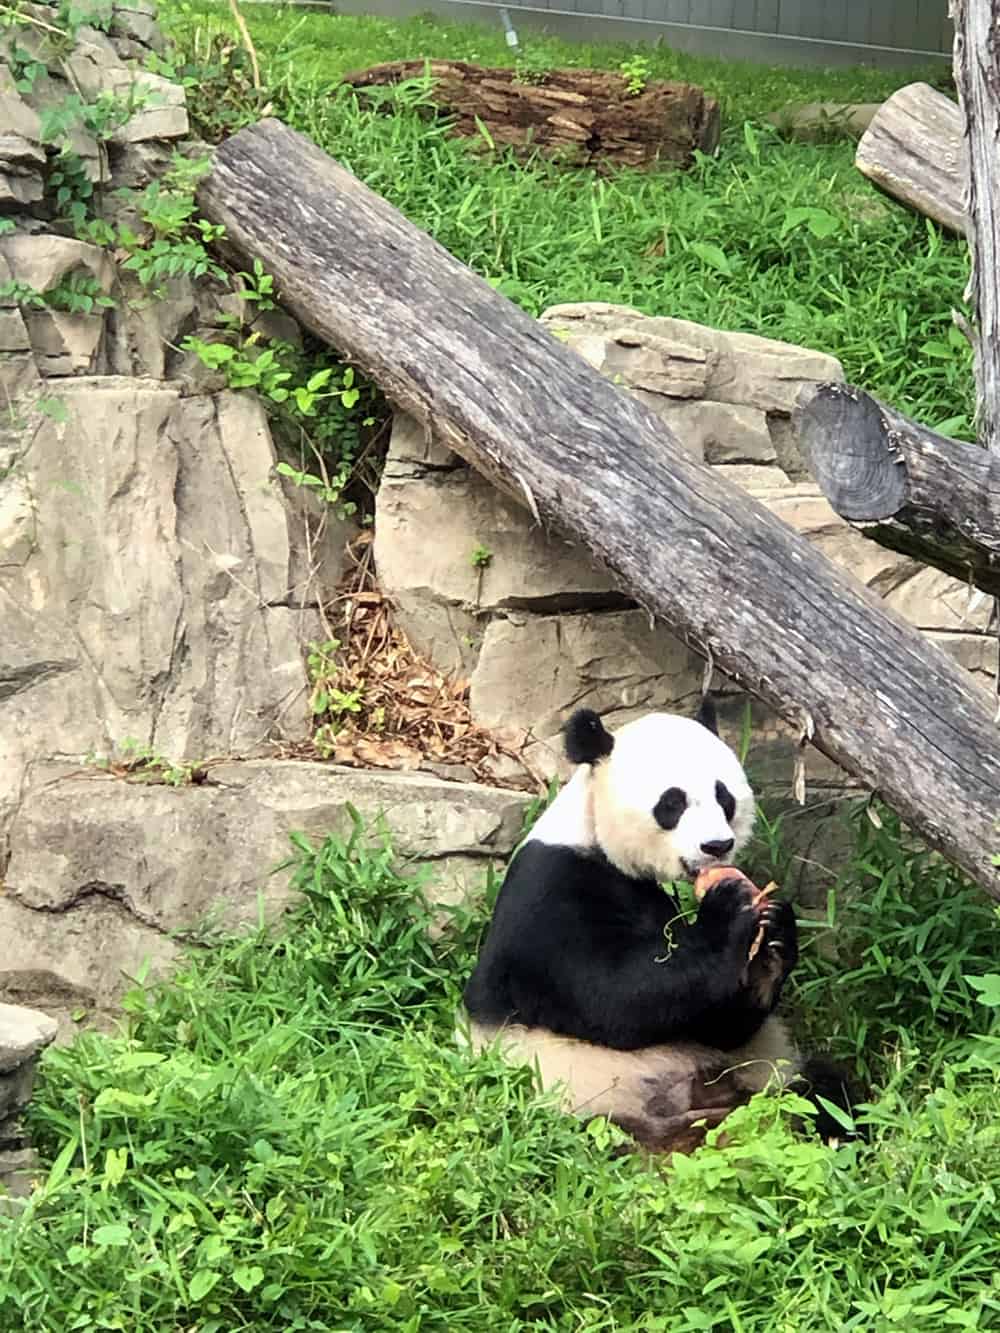 Panda eating time at the Smithsonian National Zoological Park in Washington DC| where we have visited in DC + our DC bucket list for the future | via Autumn All Along